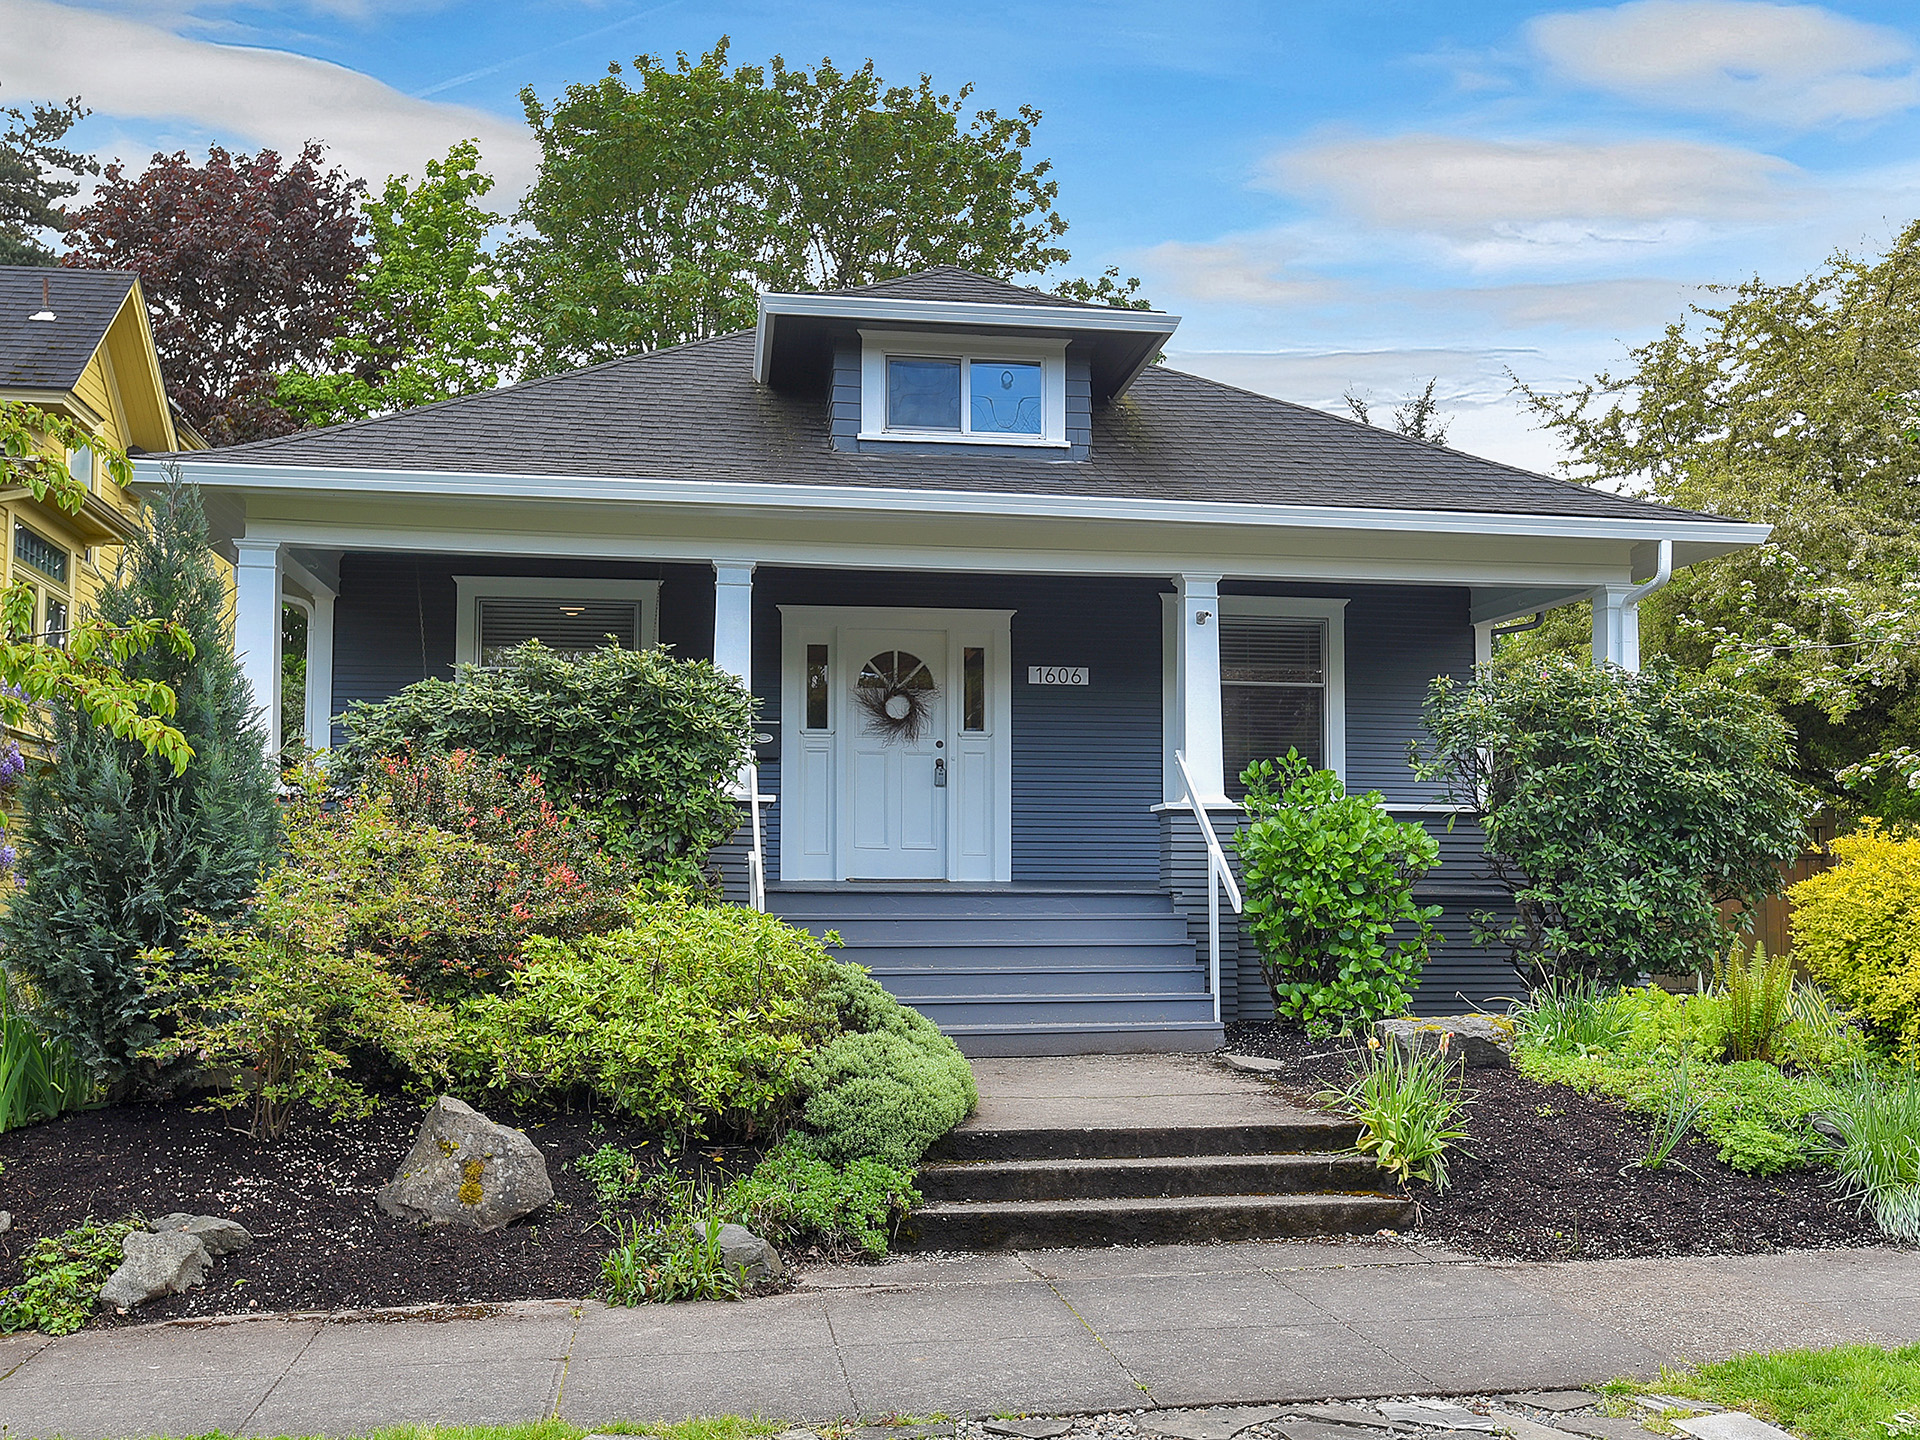 Craftsman Bungalow in Sellwood!